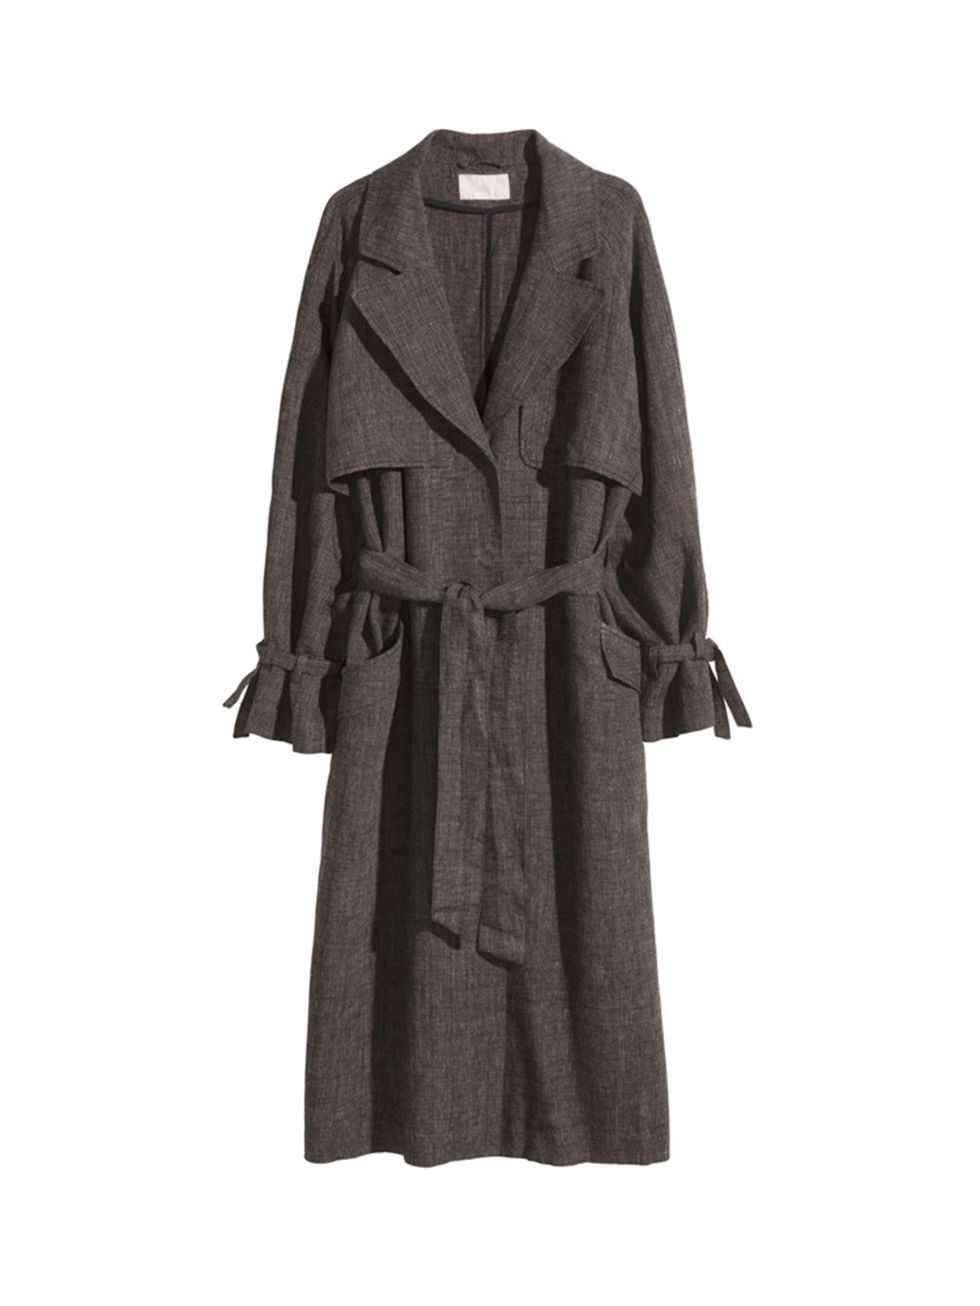 <p>Acting Commisioning Editor Georgia Simmonds is getting ready for those spring chills in this trench coat.</p>

<p><a href="http://www.hm.com/gb/product/89115?article=89115-A" target="_blank">H&M</a> trench coat, £69.99</p>